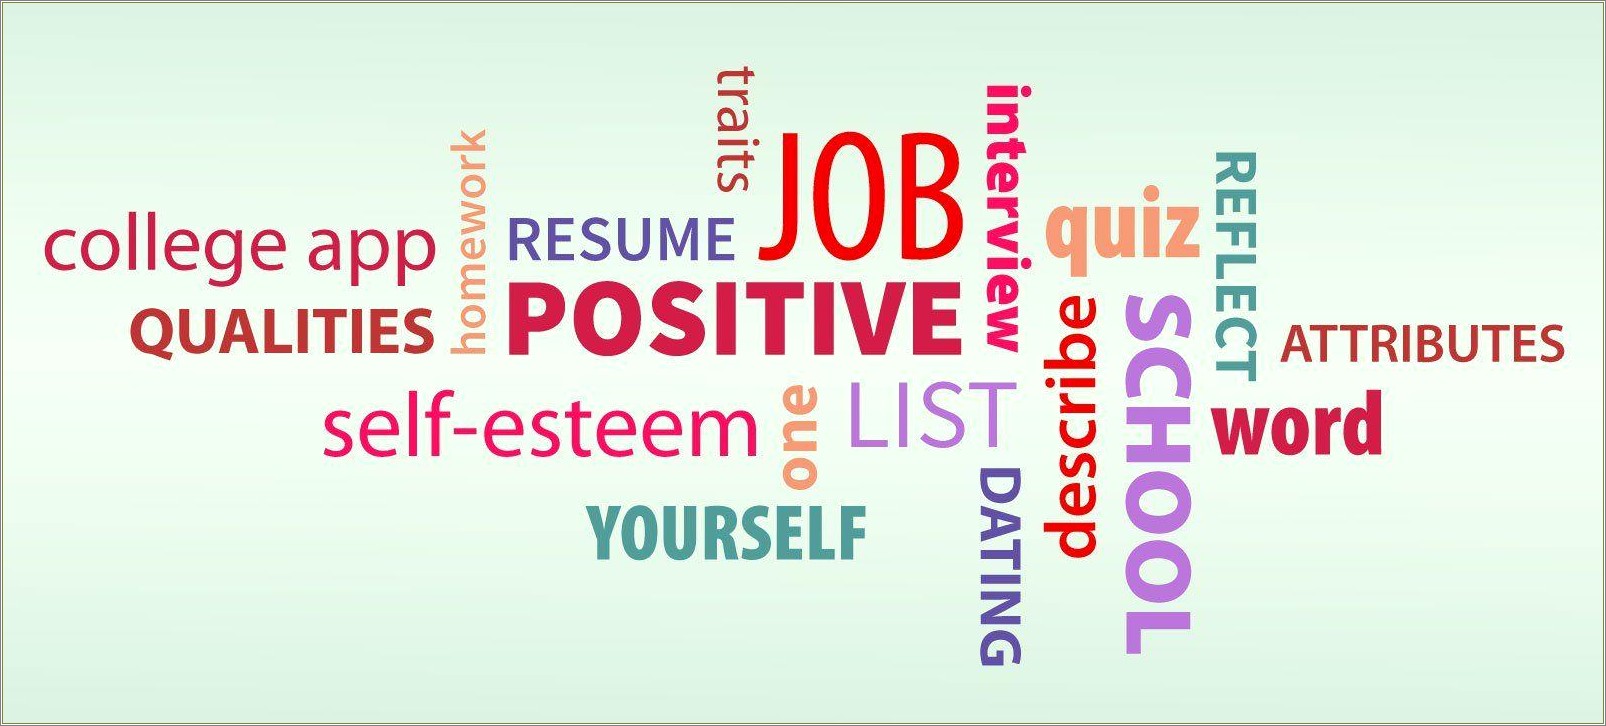 Good Ways To Describe Yourself On A Resume